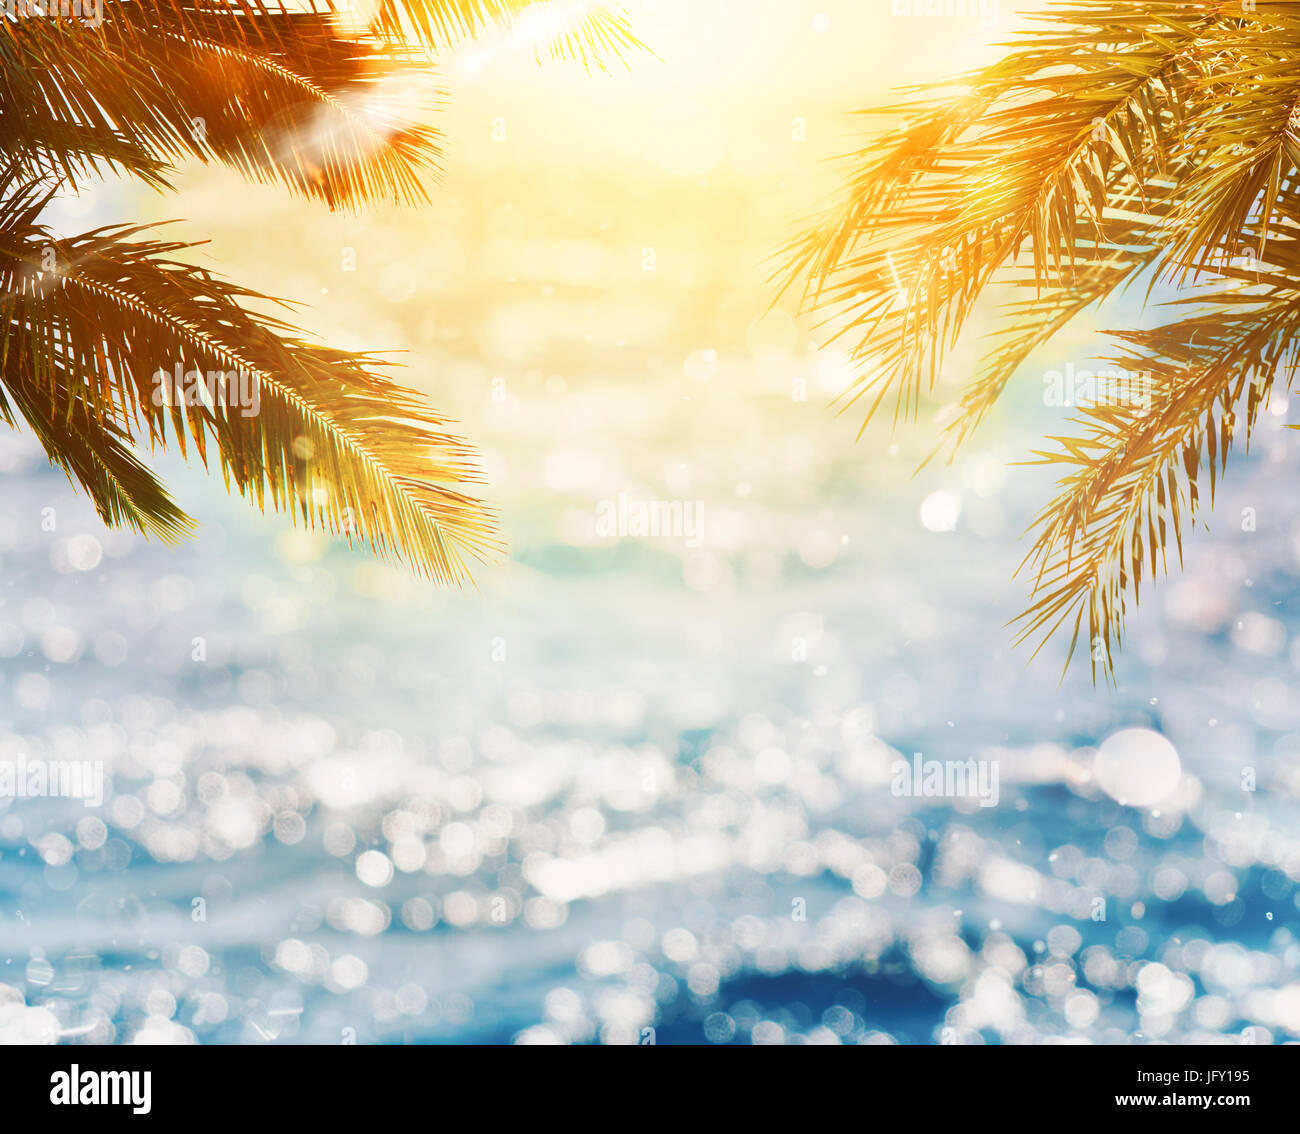 Tropical beach with coconut tree on sunset Stock Photo